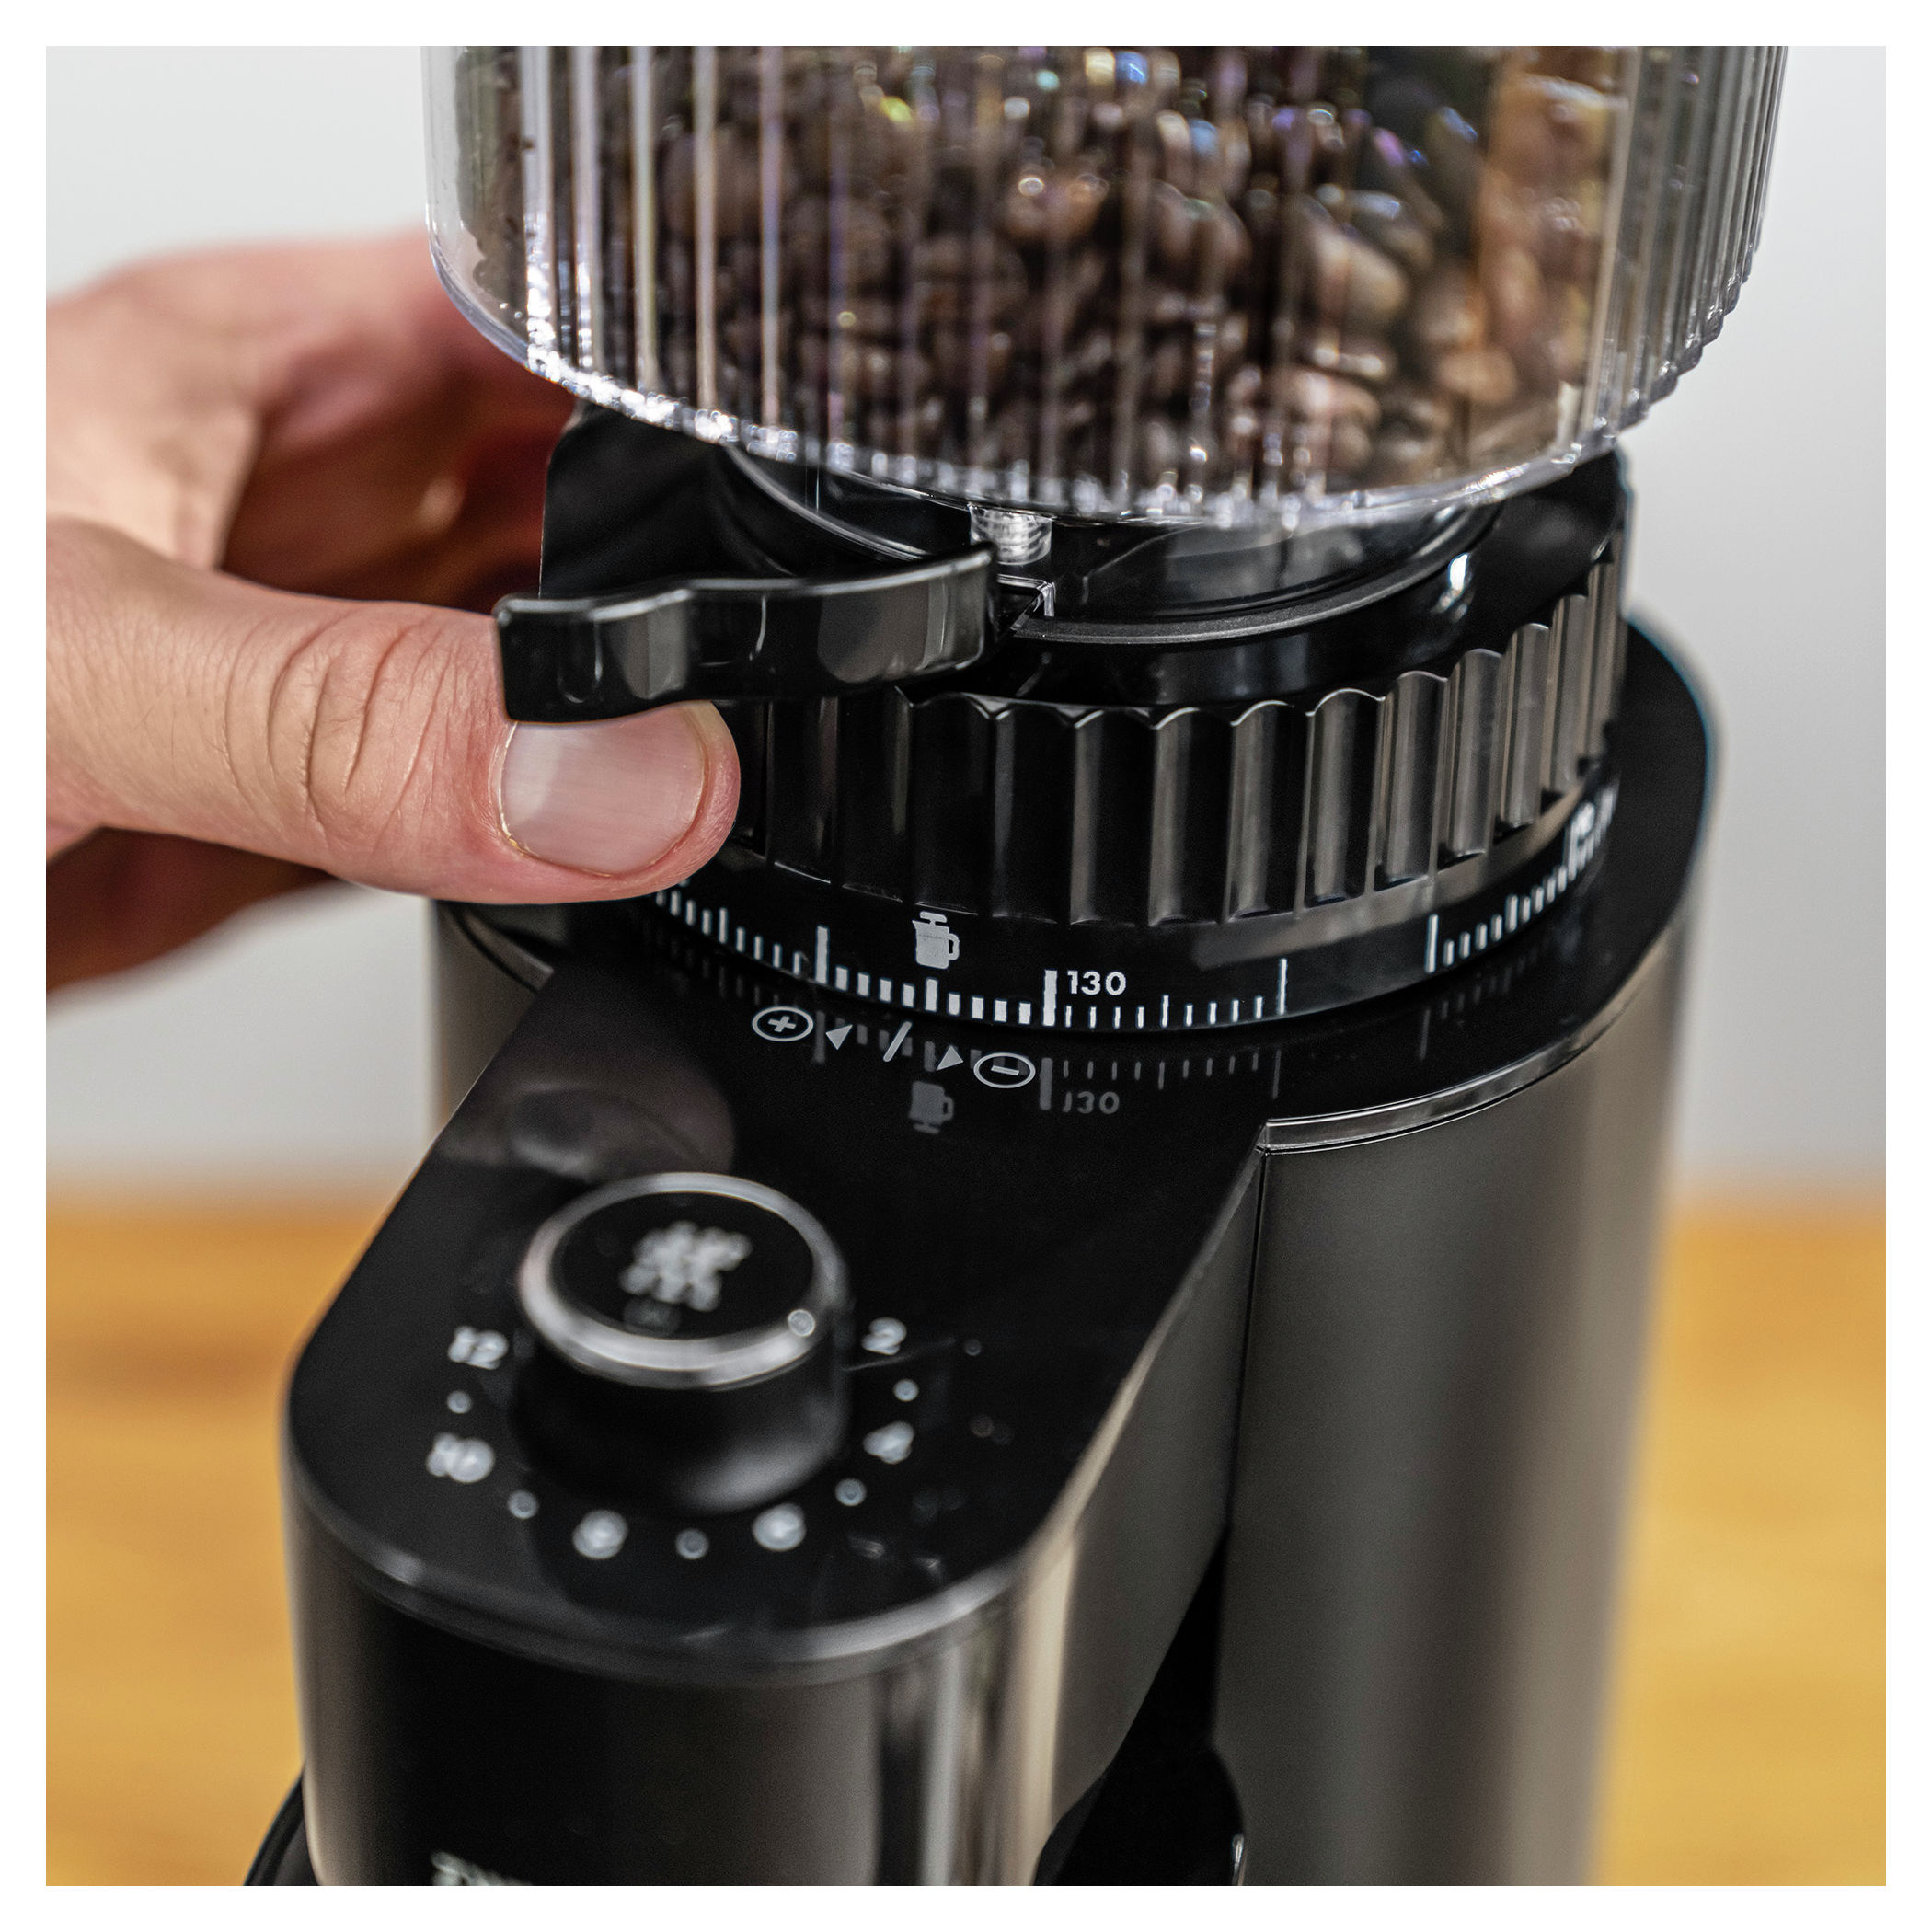 OXO Brew Adjustable Conical Burr Coffee Grinder + Reviews